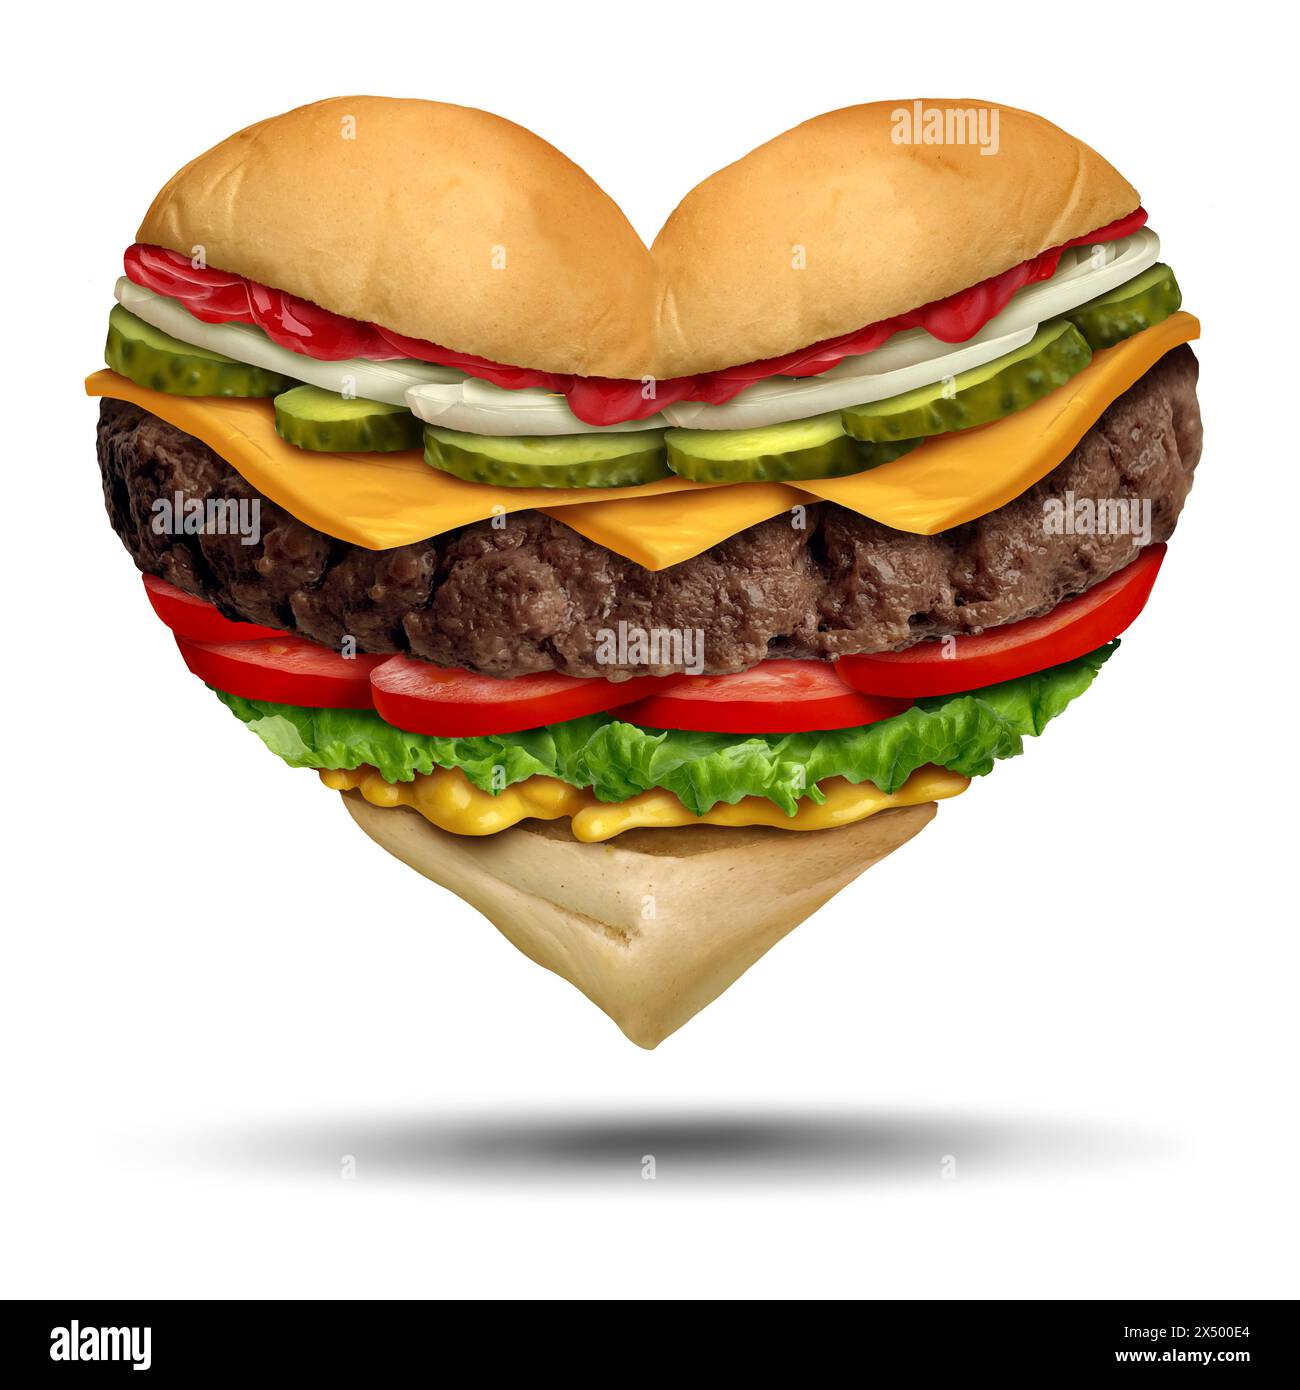 Food Love as a foodie symbol for the pleasure of eating as a hamburger or classic burger lover representing a heart as an icon for flavour and good re Stock Photo